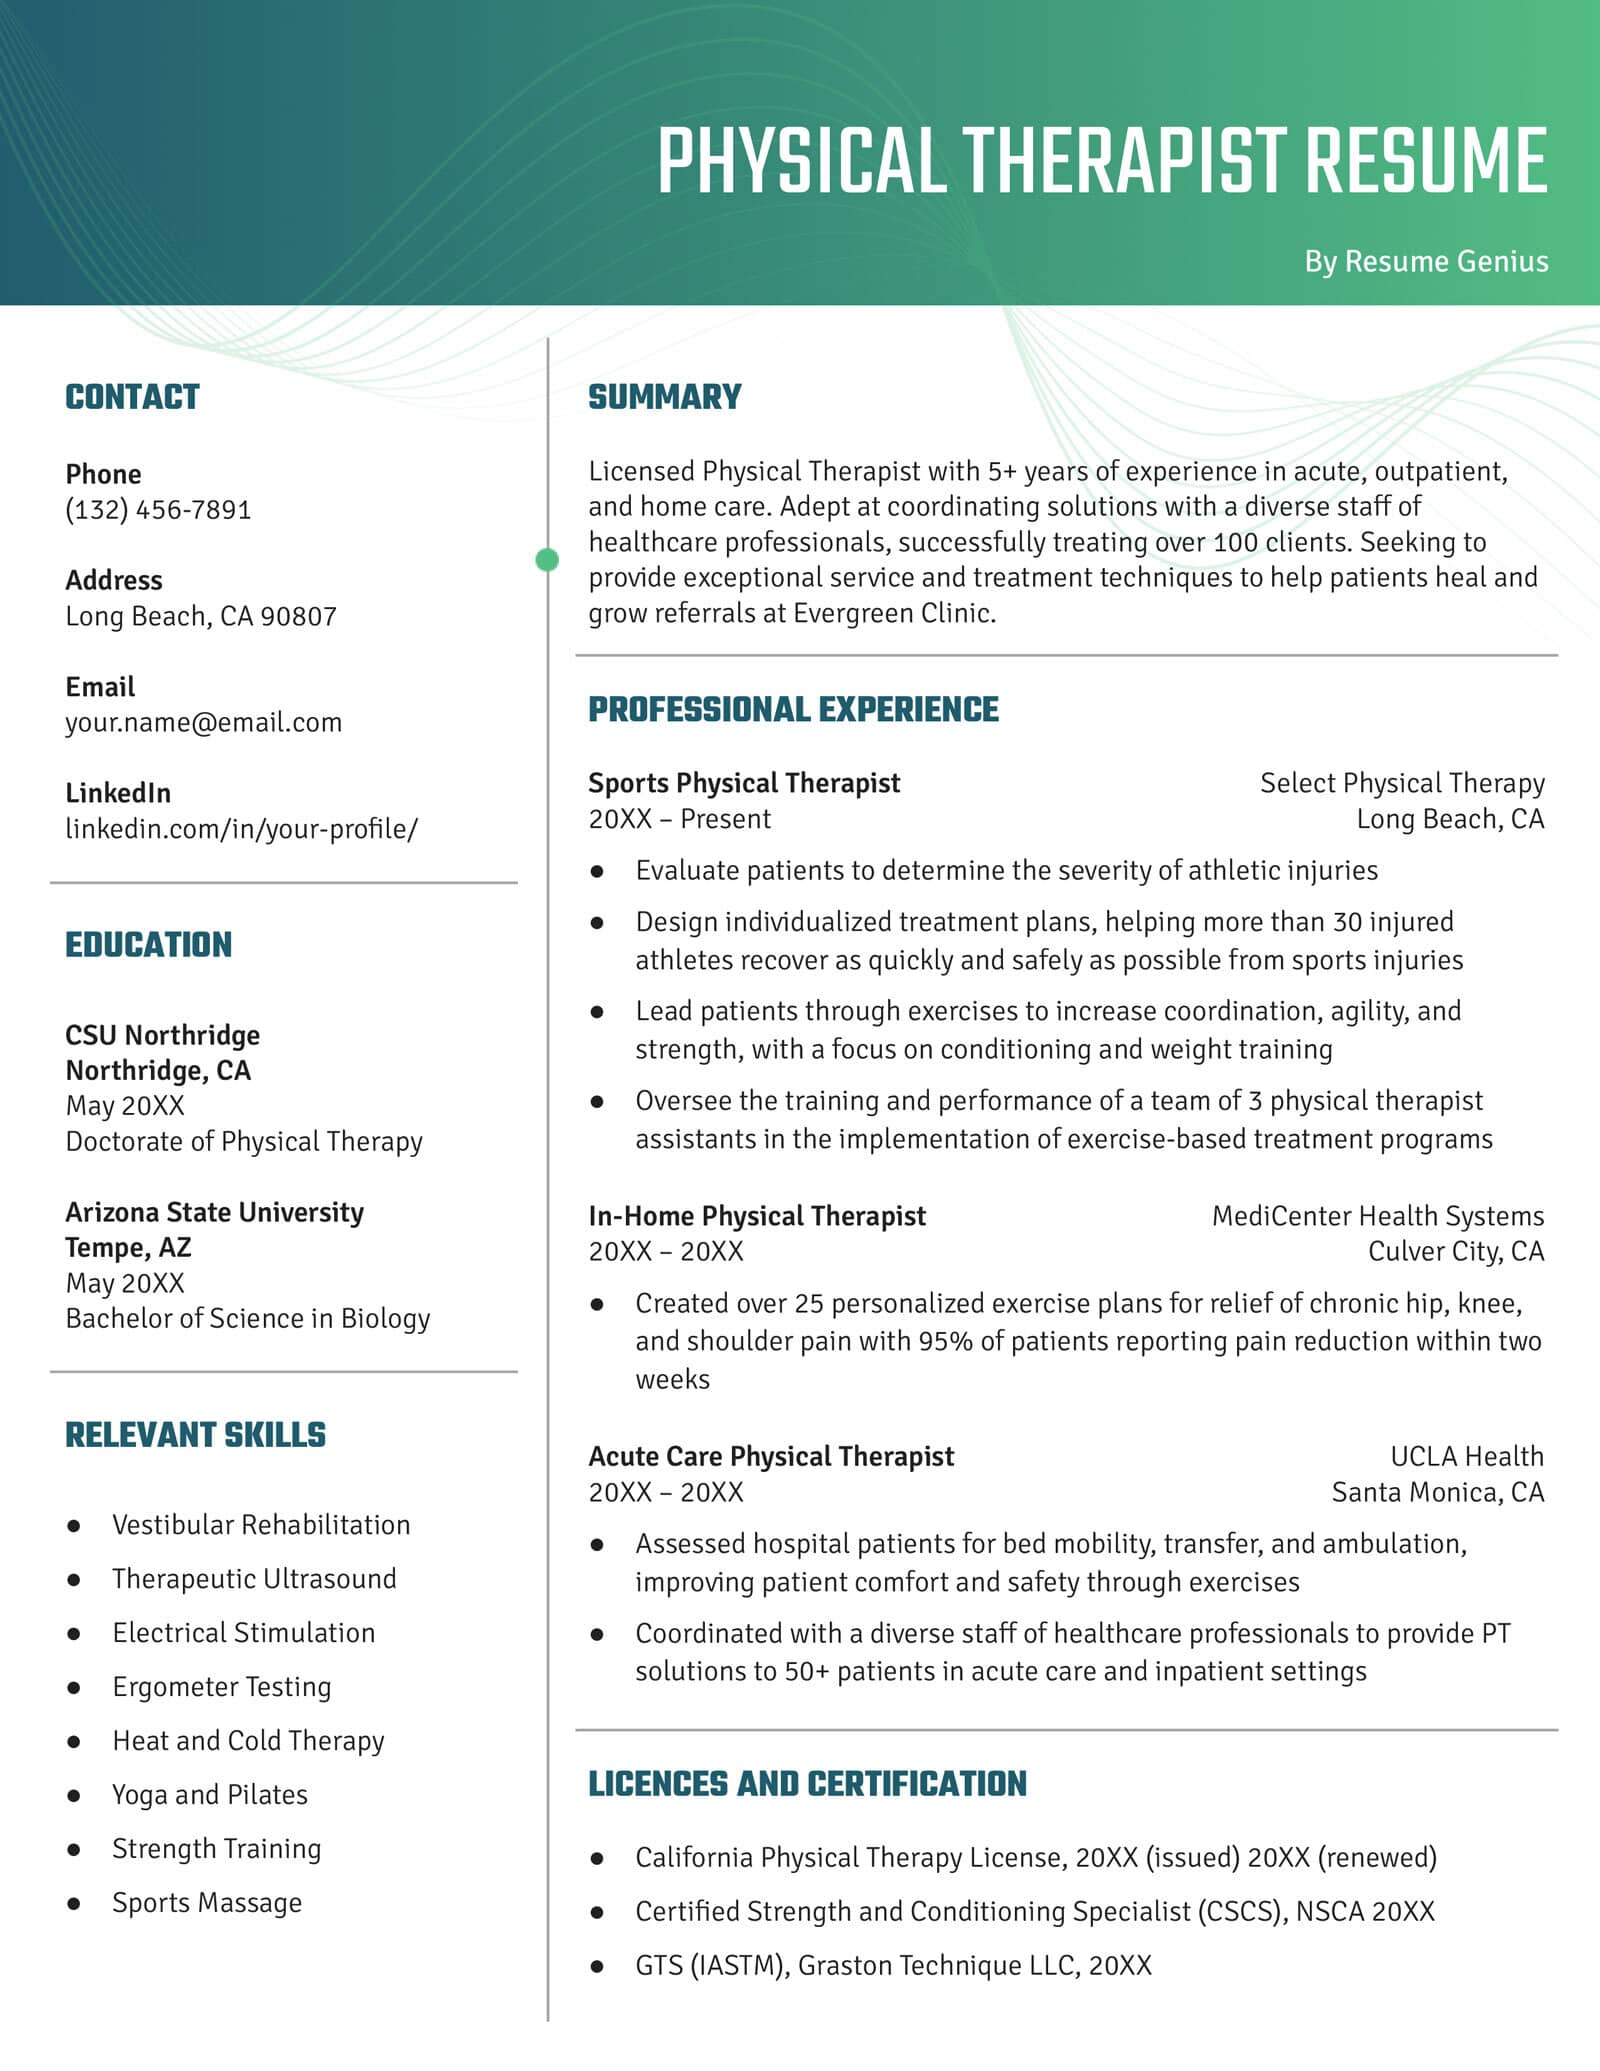 A sample of a Physical Therapist Resume